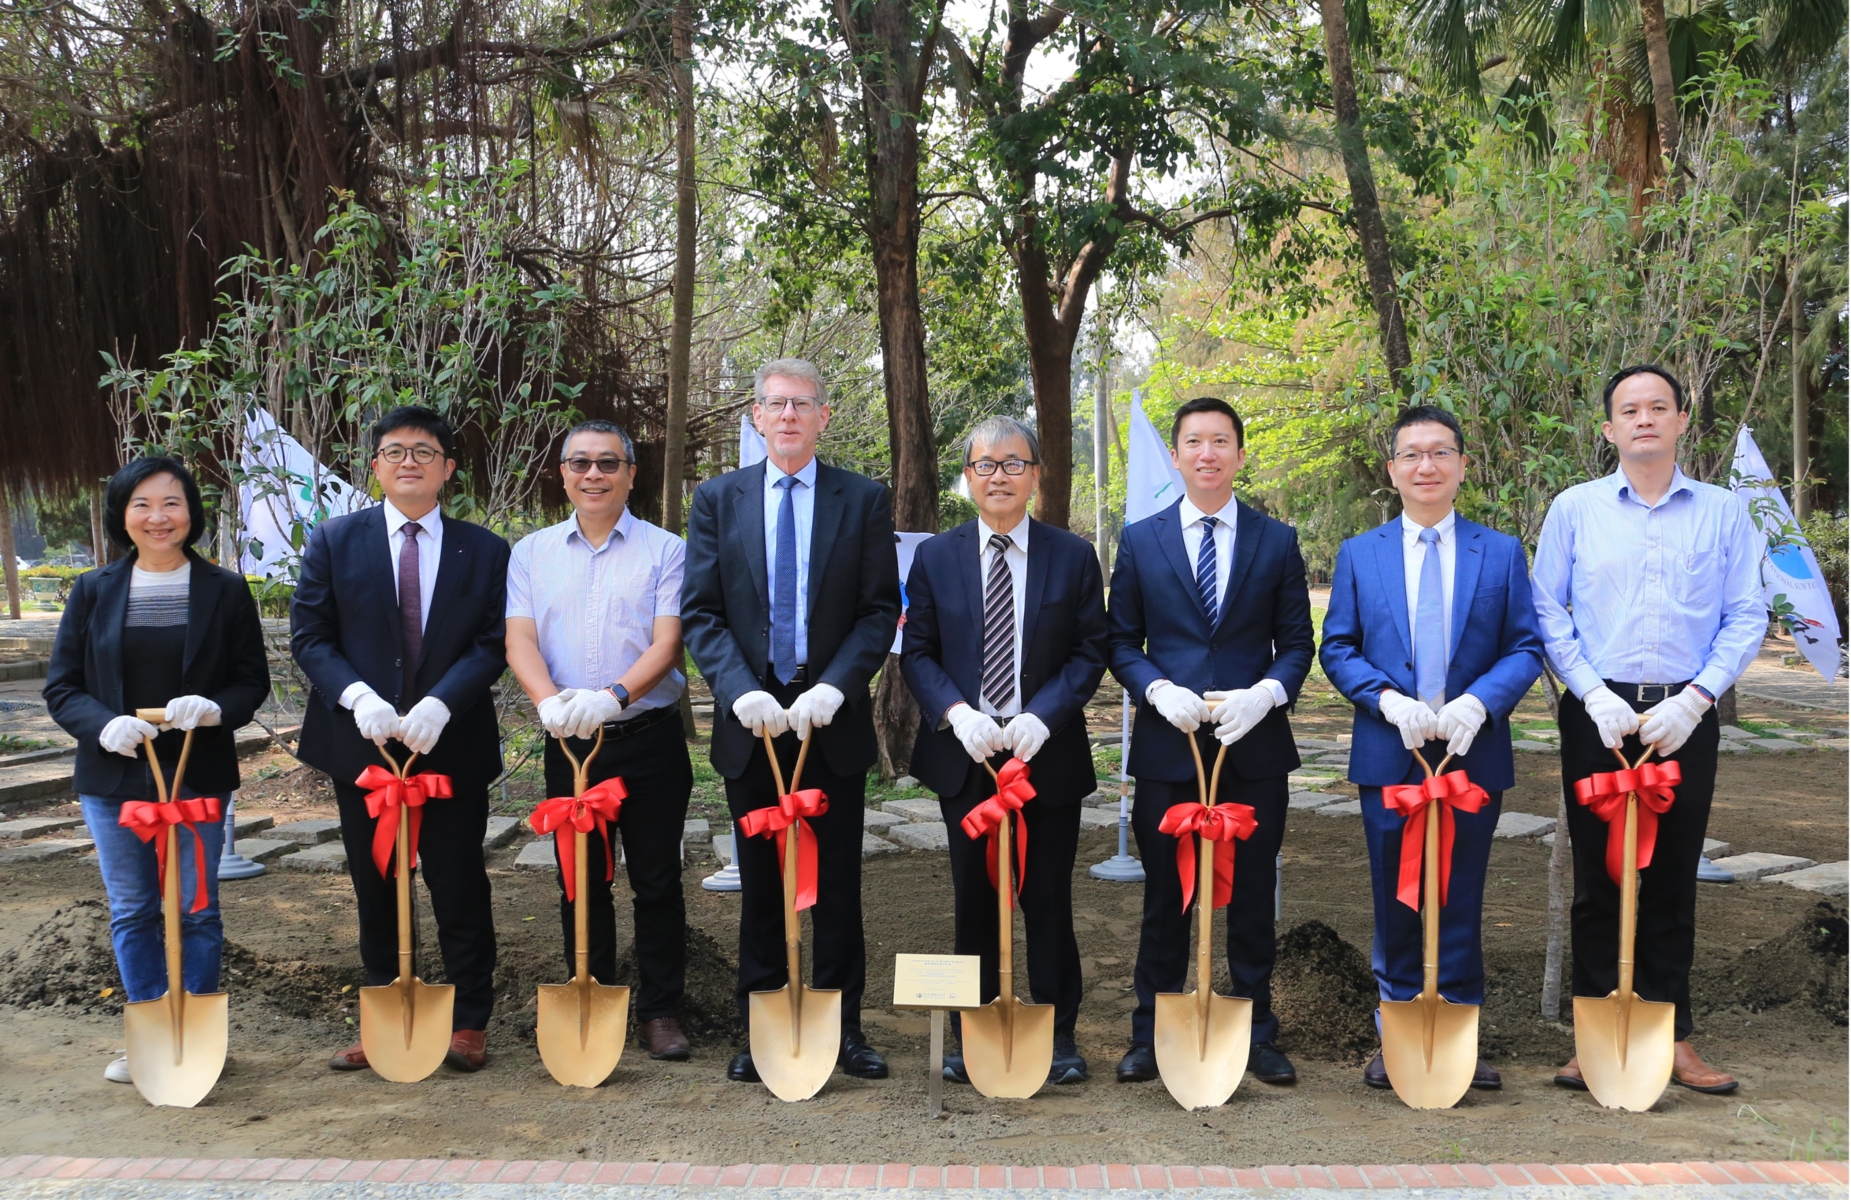 NSYSU and Fulbright Taiwan Tree Planting Initiative Ceremony. From left to right: Chief of Art Center Mei-Wen Lee, Vice President for Academic Affairs Po-Chiao Lin, Senior Vice President Chih-Wen Kuo, Fulbright Taiwan Executive Director Randall,  Nadeau, President Ying-Yao Cheng, American Institute in Taiwan Kaohsiung Branch Office Public Diplomacy Section Chief Nelson Wen, Vice President for International Affairs Mitch Chou, Vice President for General Affairs Yuan-Chung Lin.